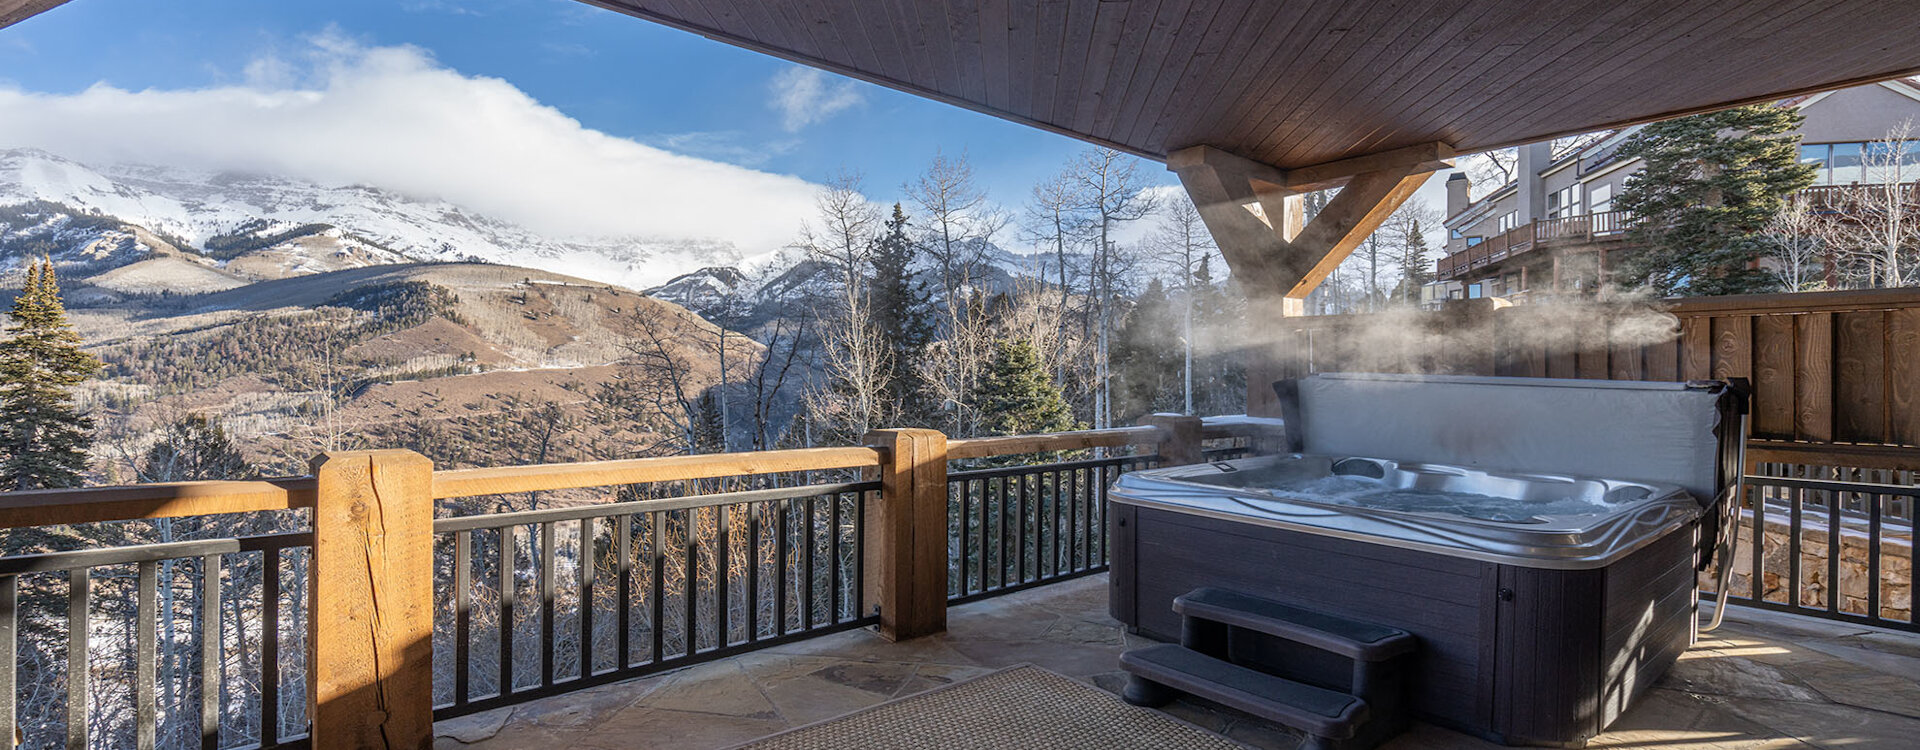 2.0-see-forever-121-mountain-village-hot-tub1